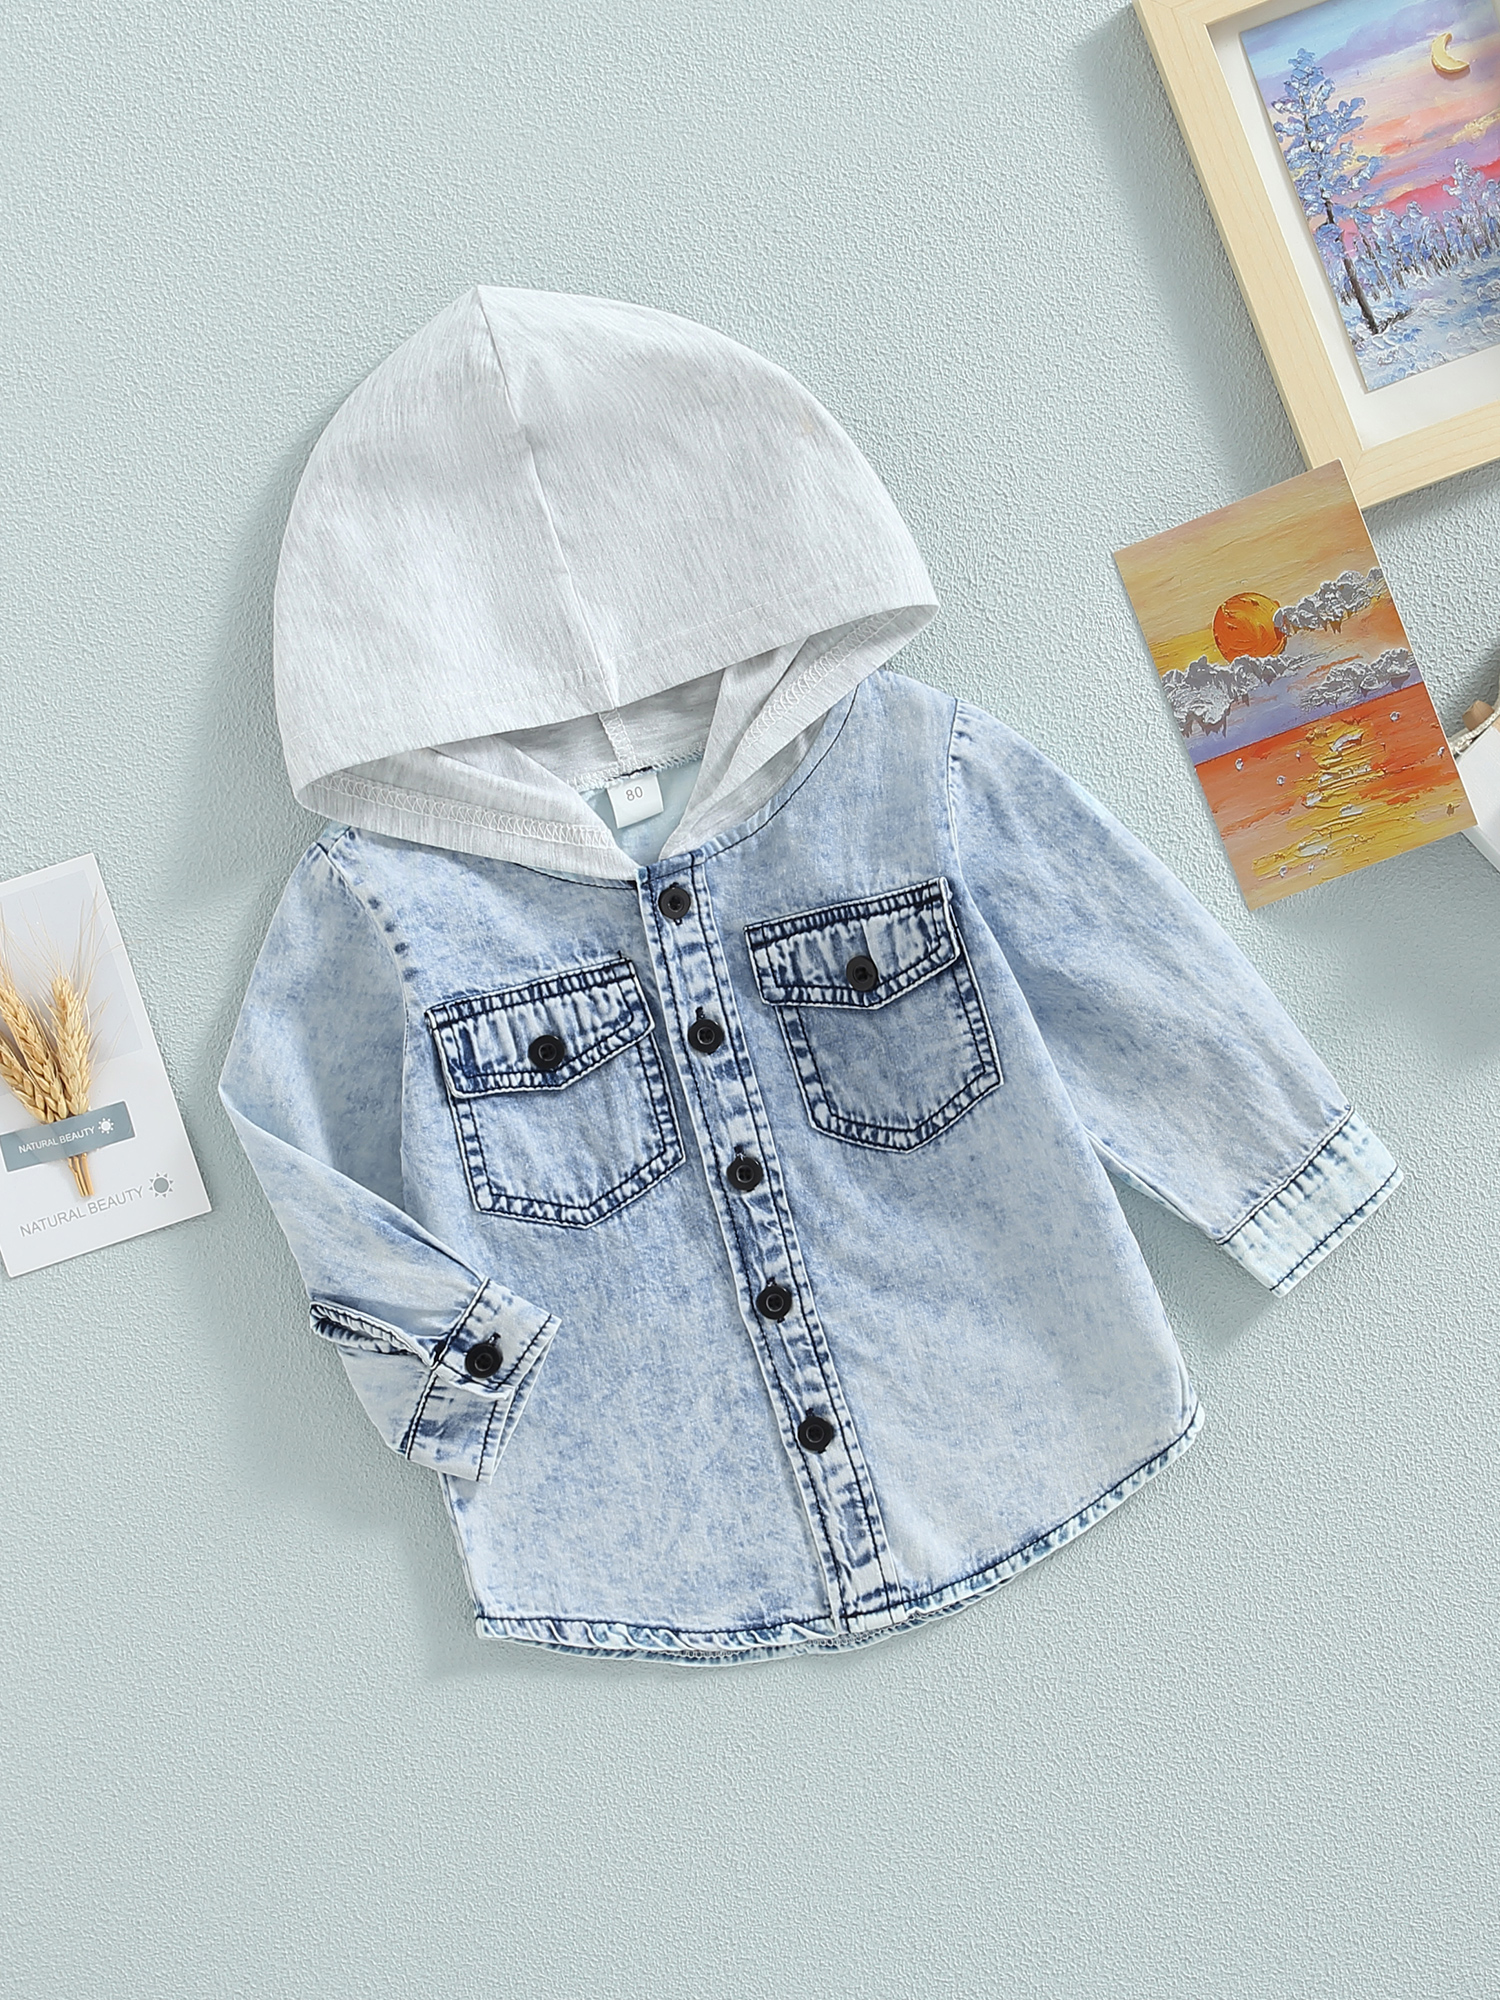 Sunisery Baby Boys Denim Hoodie Jacket Kids Toddler Button Down Jeans Jacket Top Spring Autumn Coat Outerwear - image 2 of 6